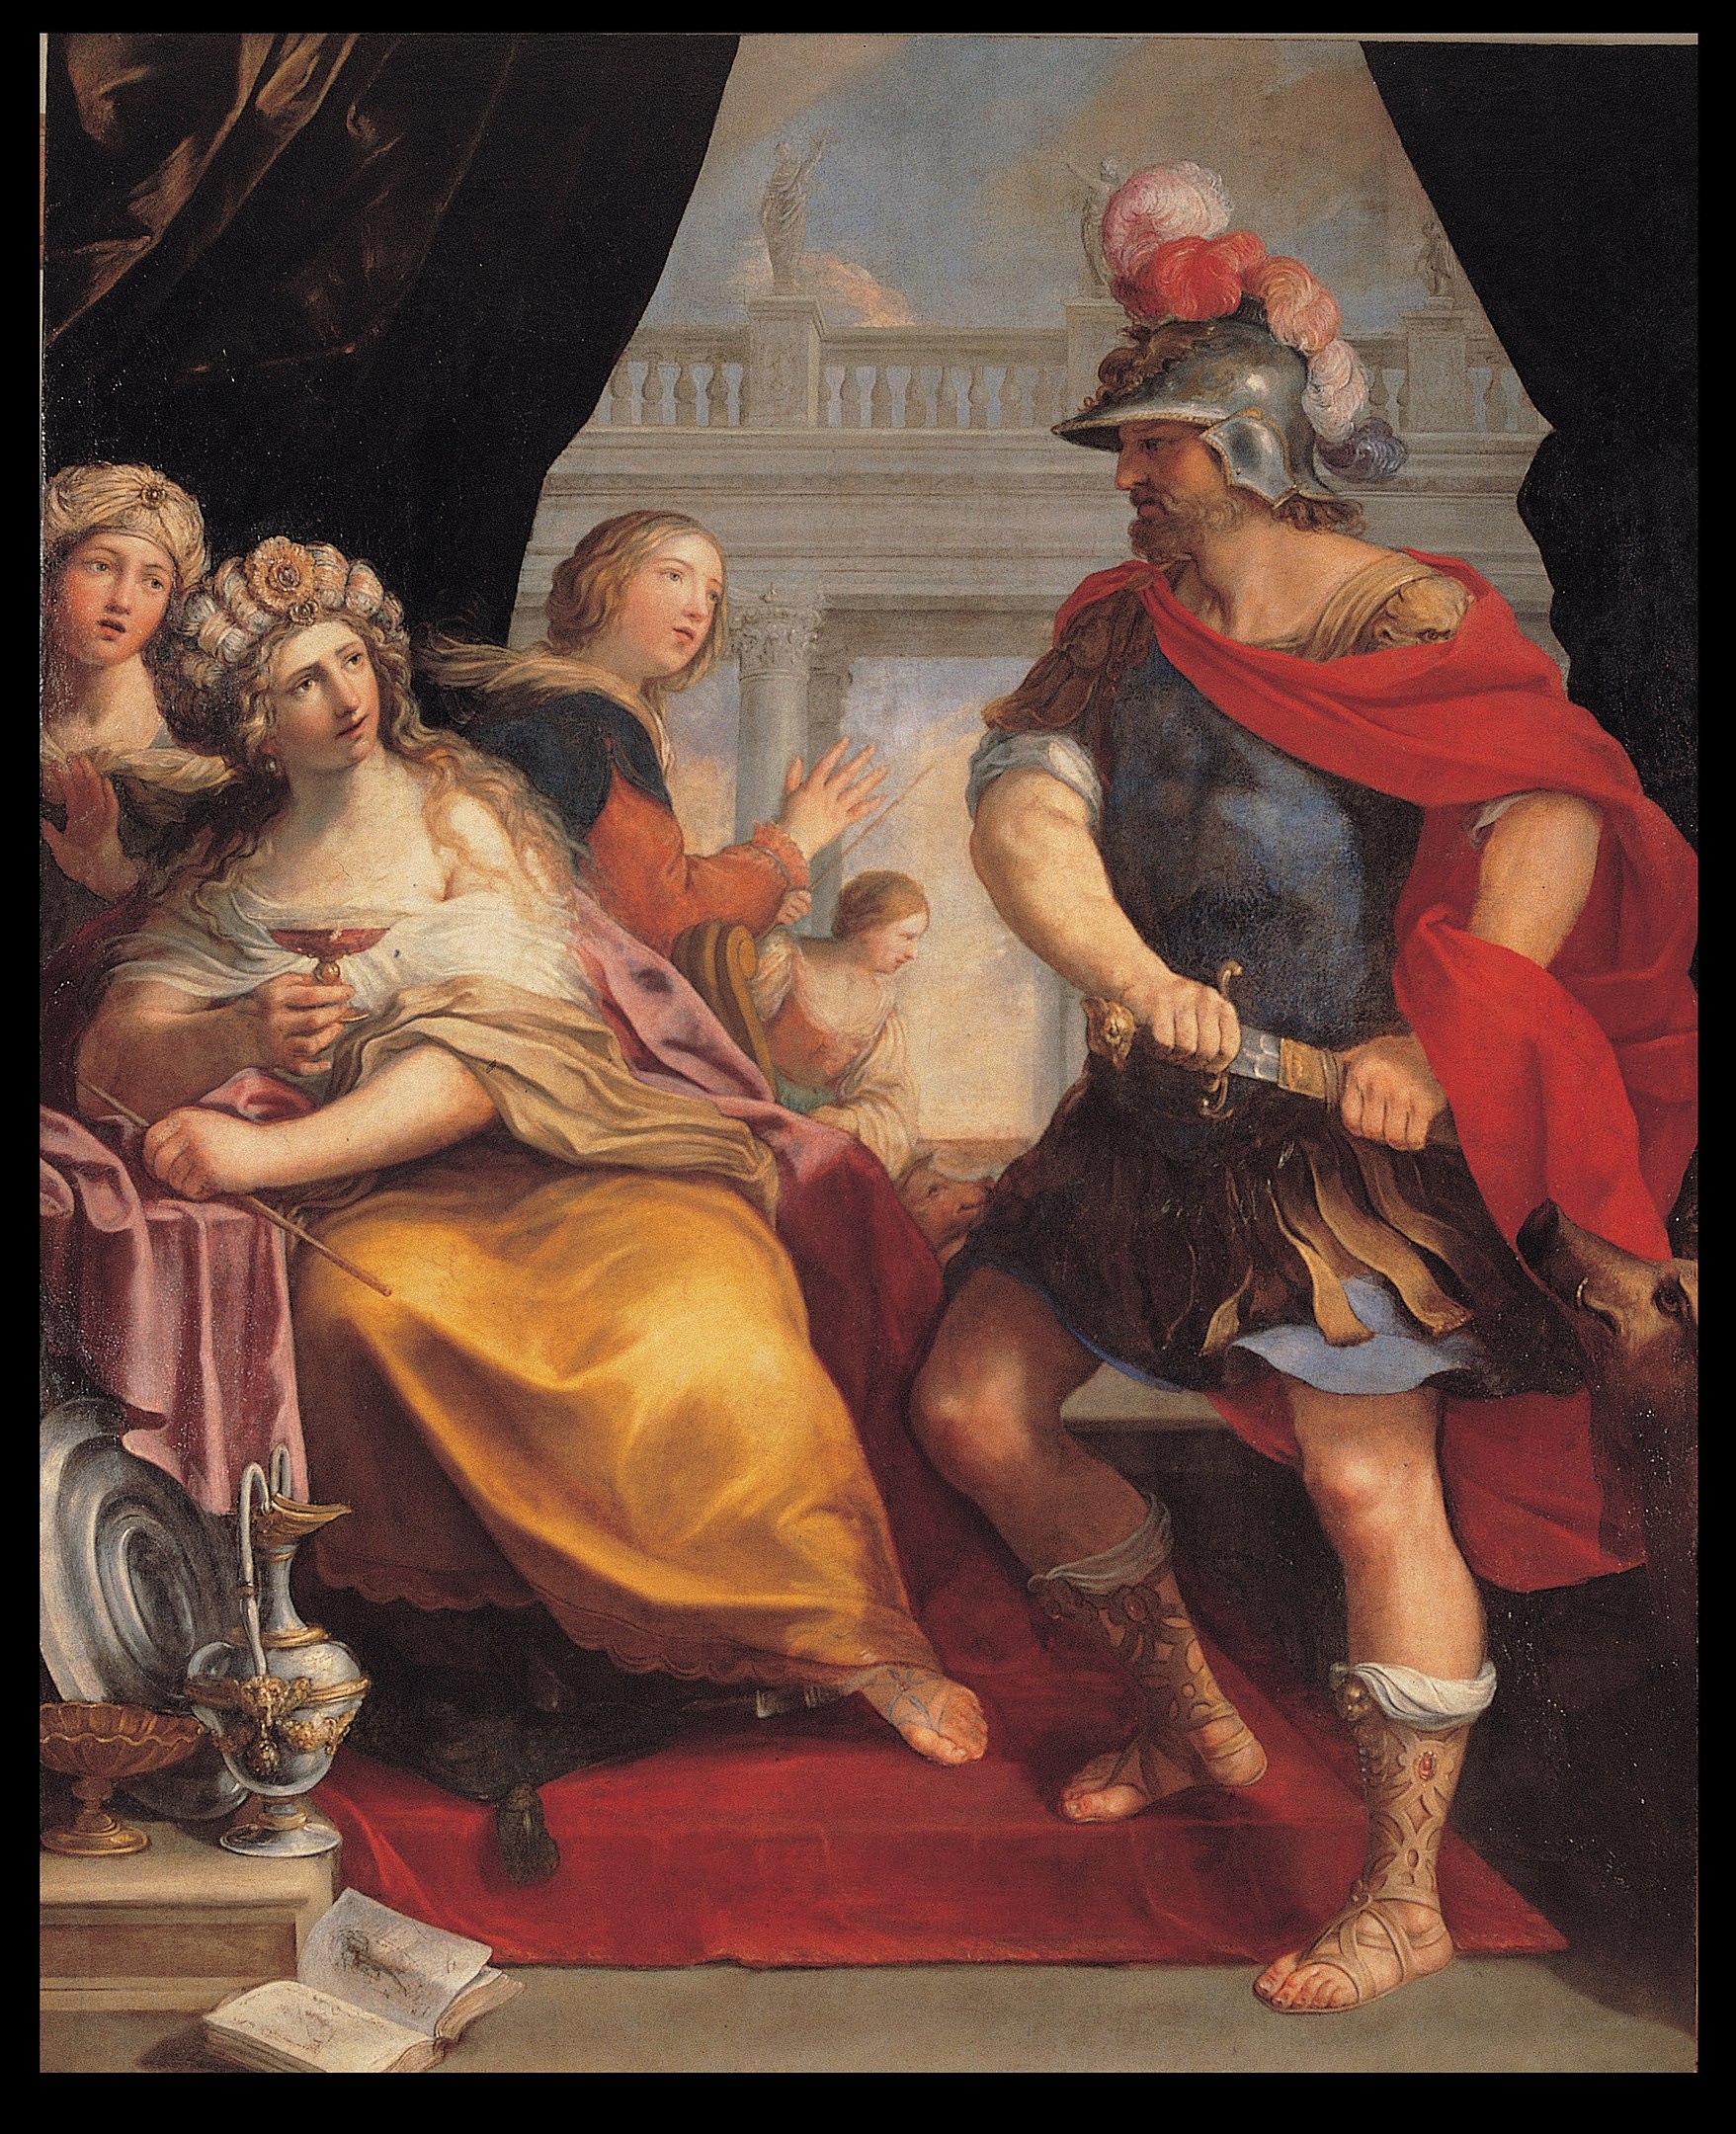 A man unsheathing his sword before a seated woman holding a glass of wine as other figures behind her take fright